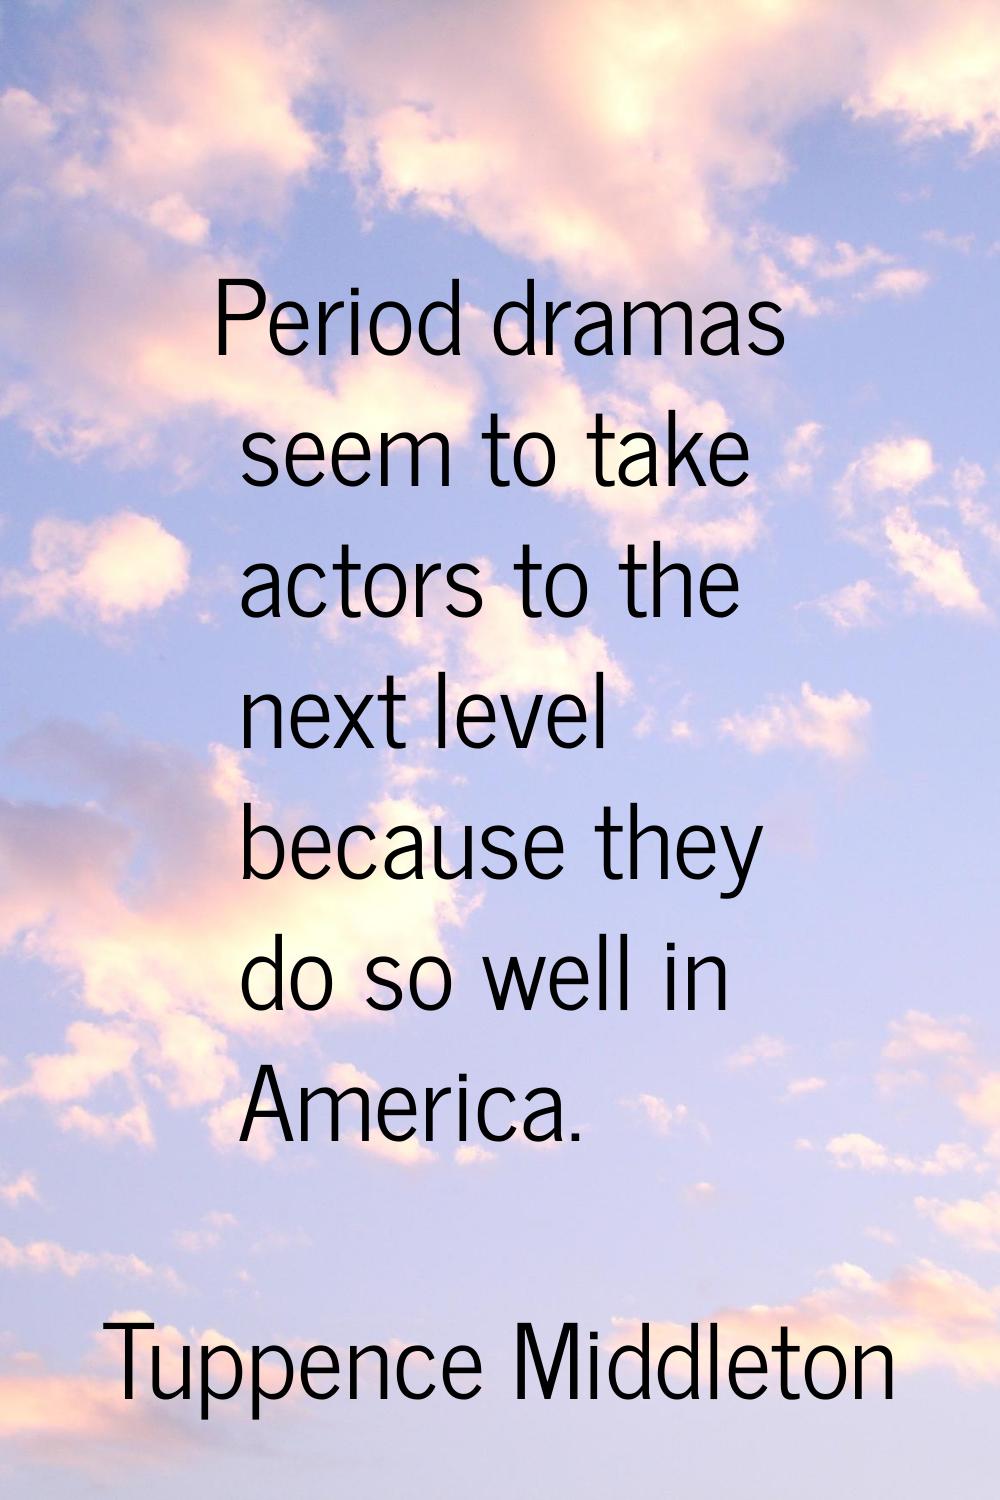 Period dramas seem to take actors to the next level because they do so well in America.